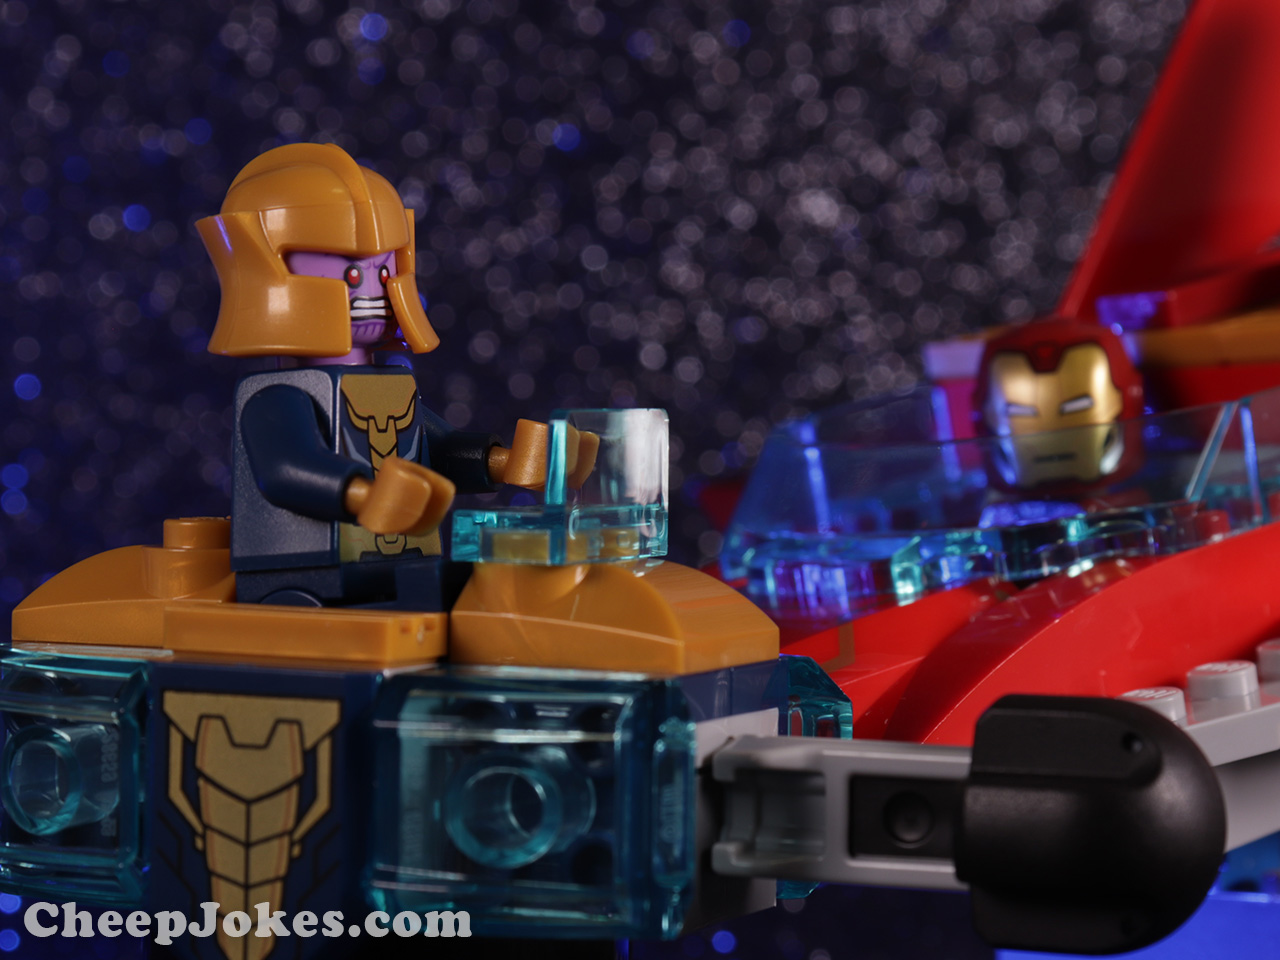 LEGO® Marvel Avengers Iron Man vs. Thanos (76170) puts superhero action into kids’ hands. This versatile, buildable action toy is designed to encourage shared play and developmental growth. Empower young superheroes! Made with budding builders in mind, 4+ sets are packed with cool details to ensure youngsters have a great play experience. Inside the box, each bag of bricks contains a complete model and character to get the play started fast.